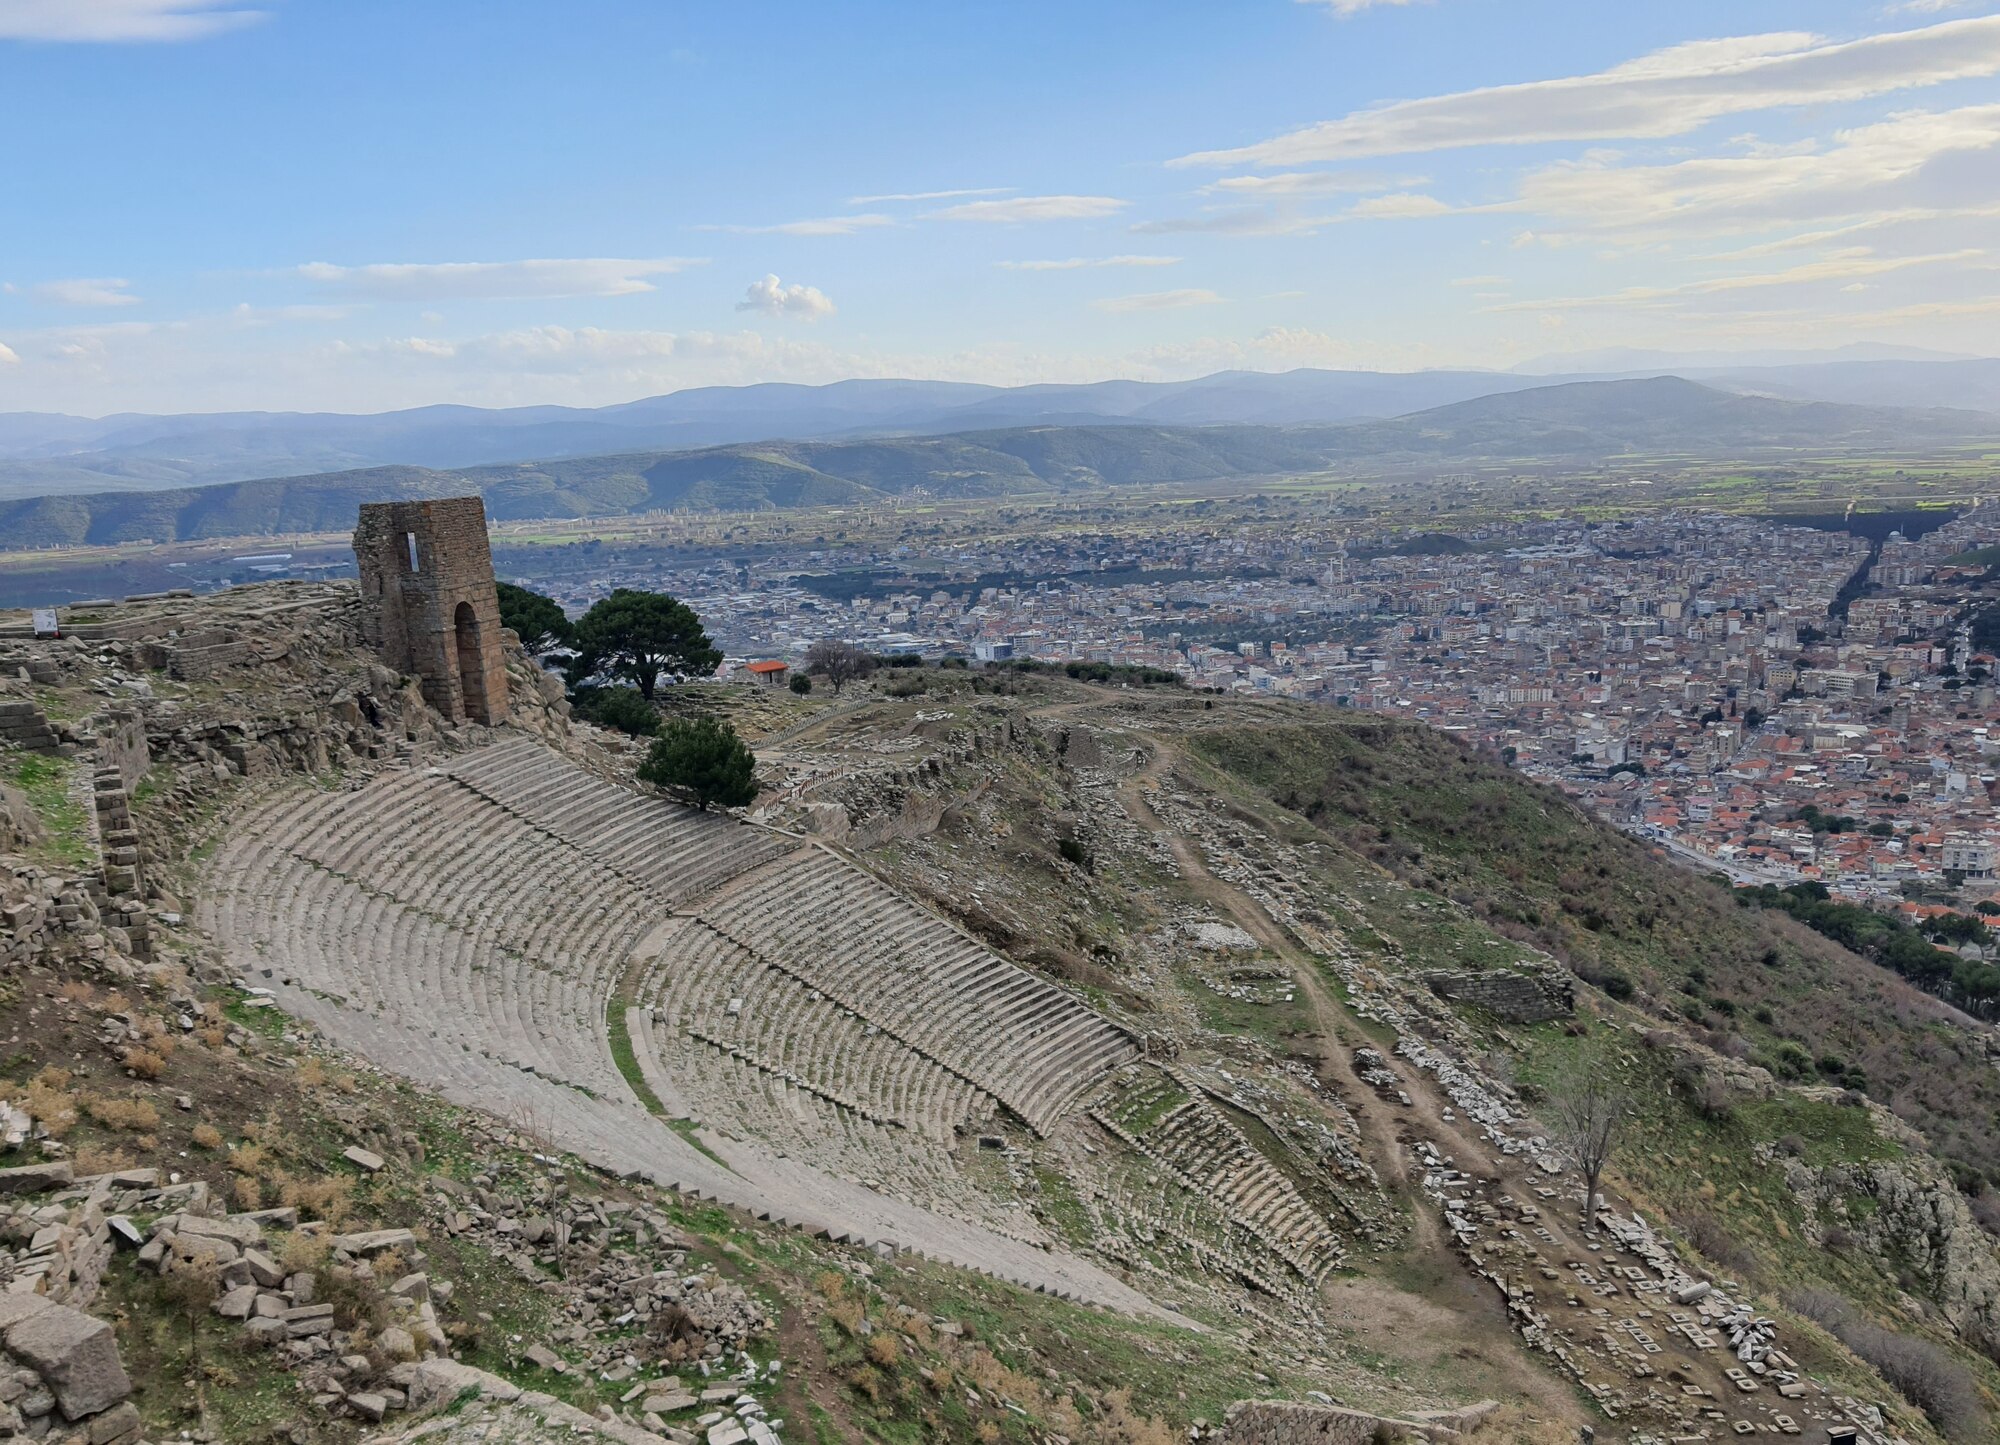 A view of the steepest and first theater with a wooden stage at Pergamon, Türkiye, Jan. 21, 2023.